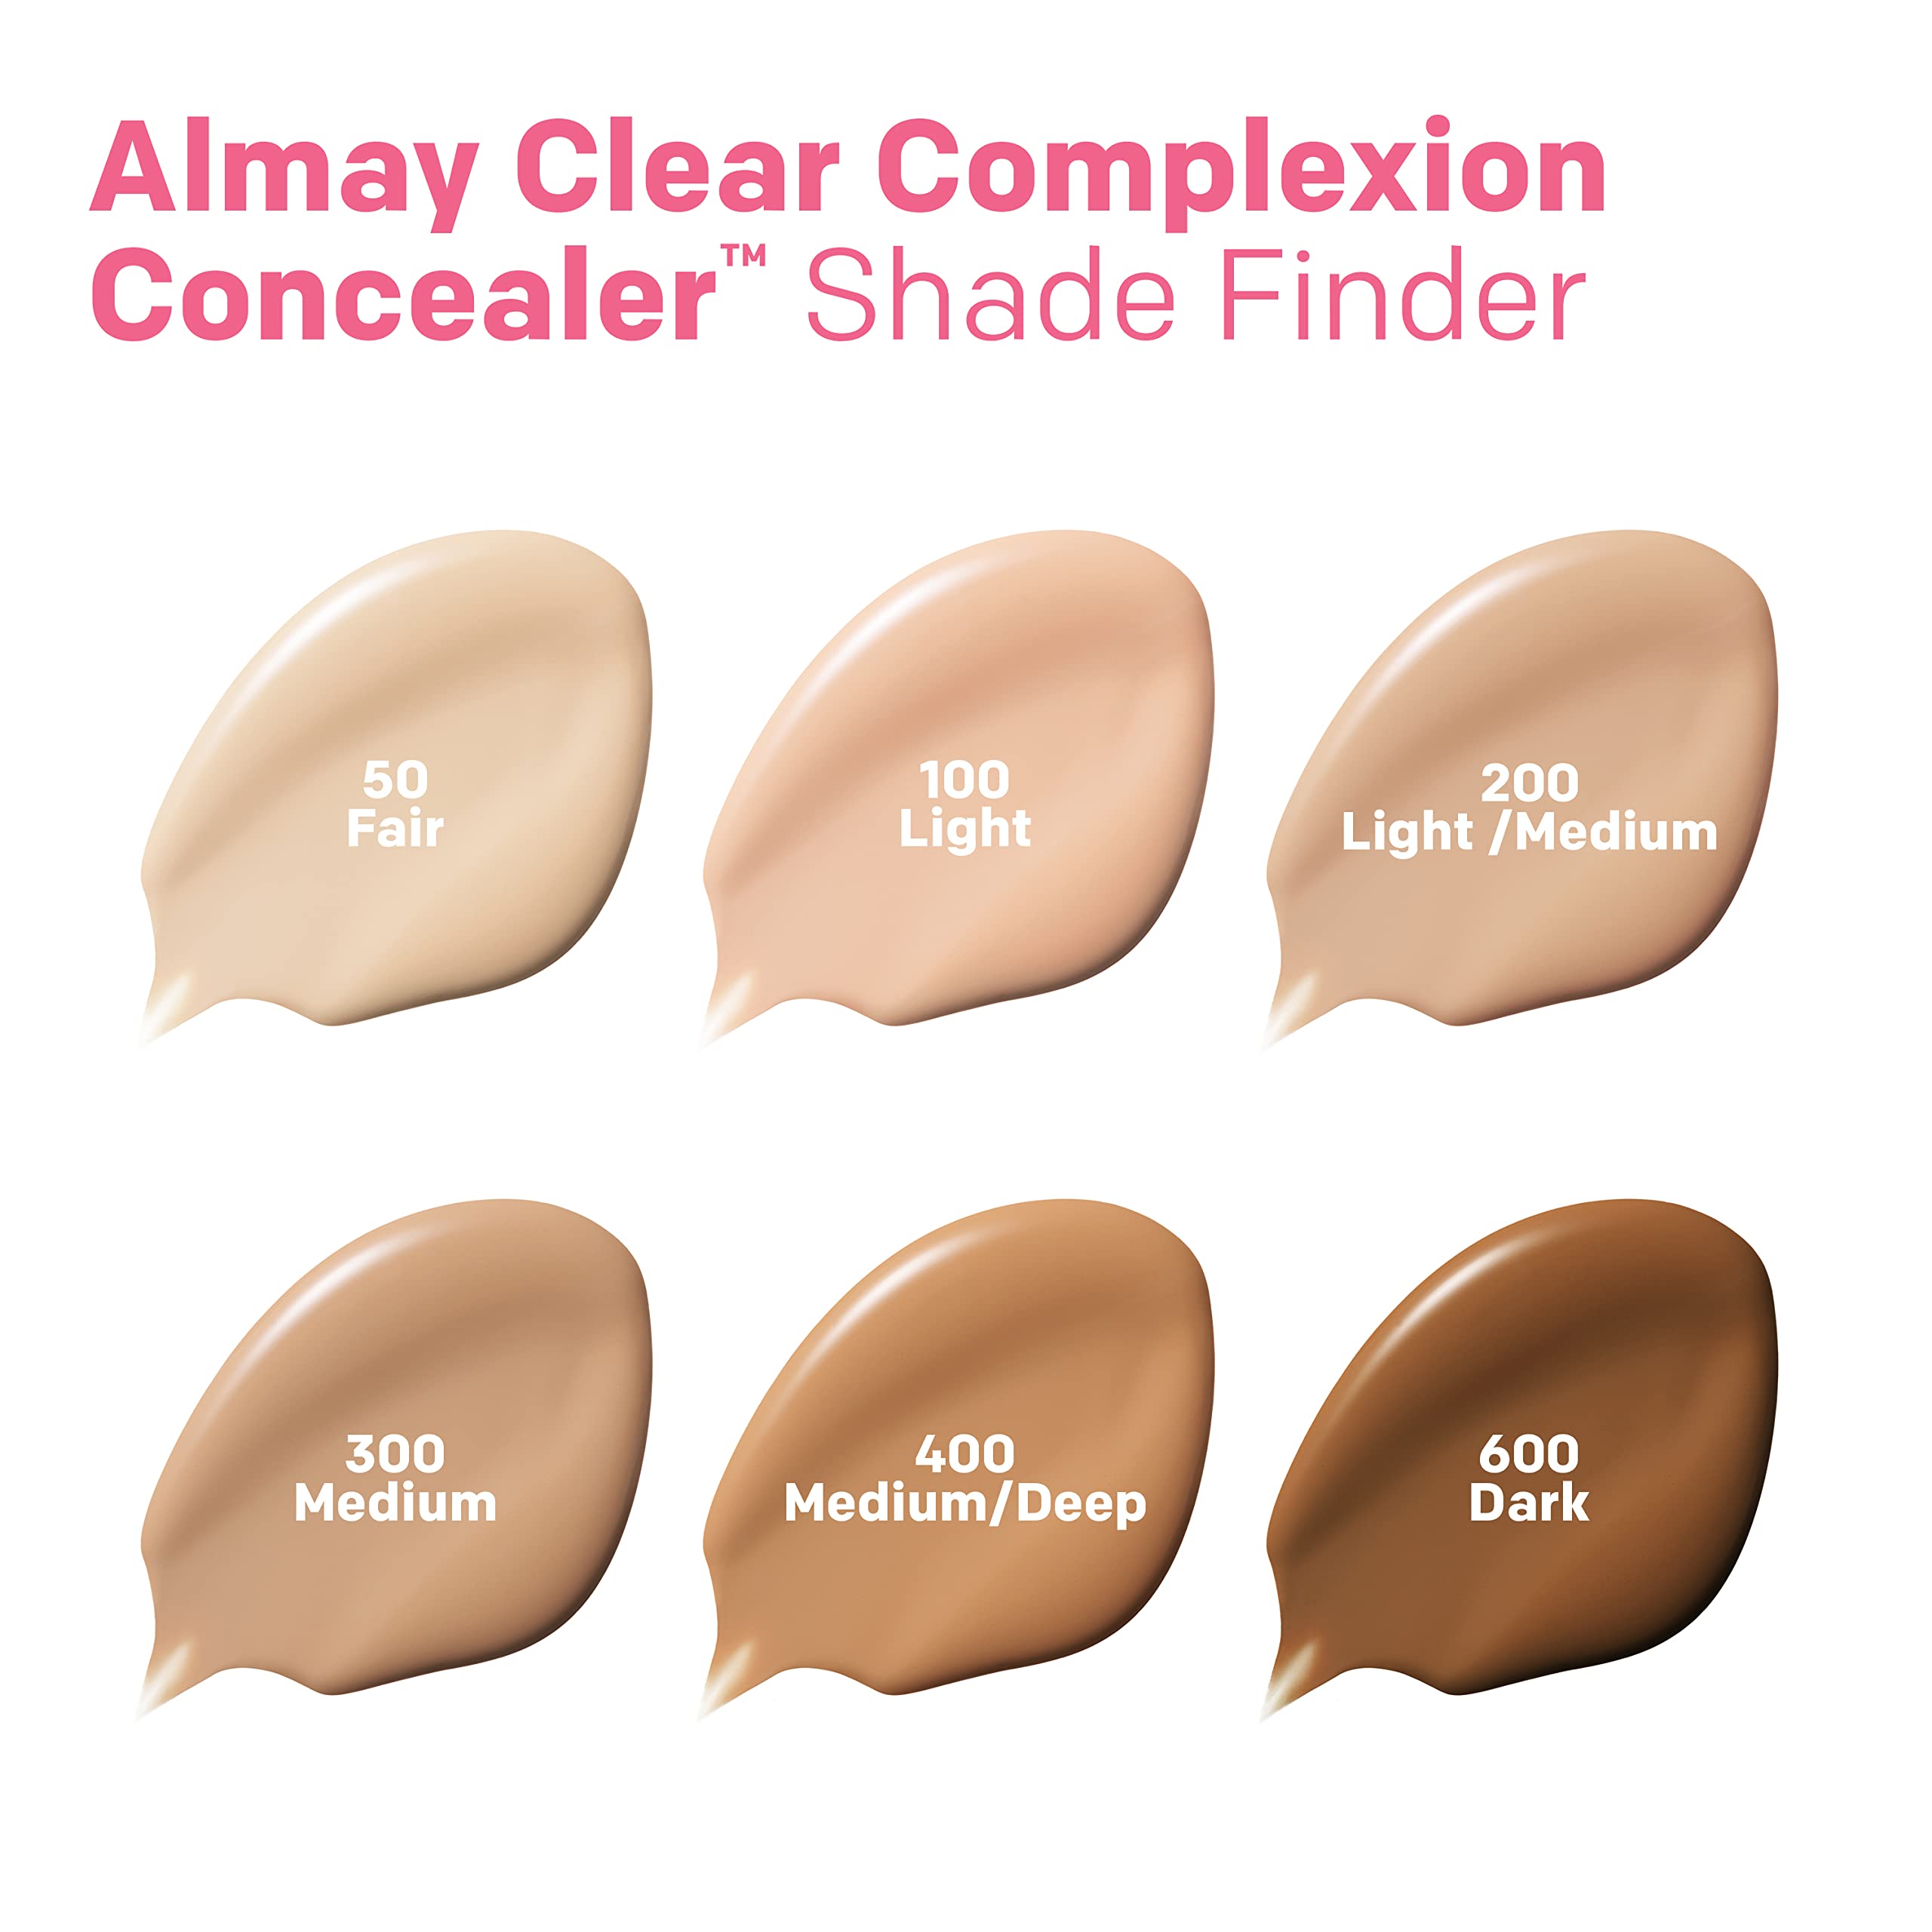 Almay Clear Complexion Acne & Blemish Spot Treatment Concealer Makeup with Salicylic Acid- Lightweight, Full Coverage, Hypoallergenic, Fragrance-Free, for Sensitive Skin, 200 Light/Medium, 0.3 fl oz.